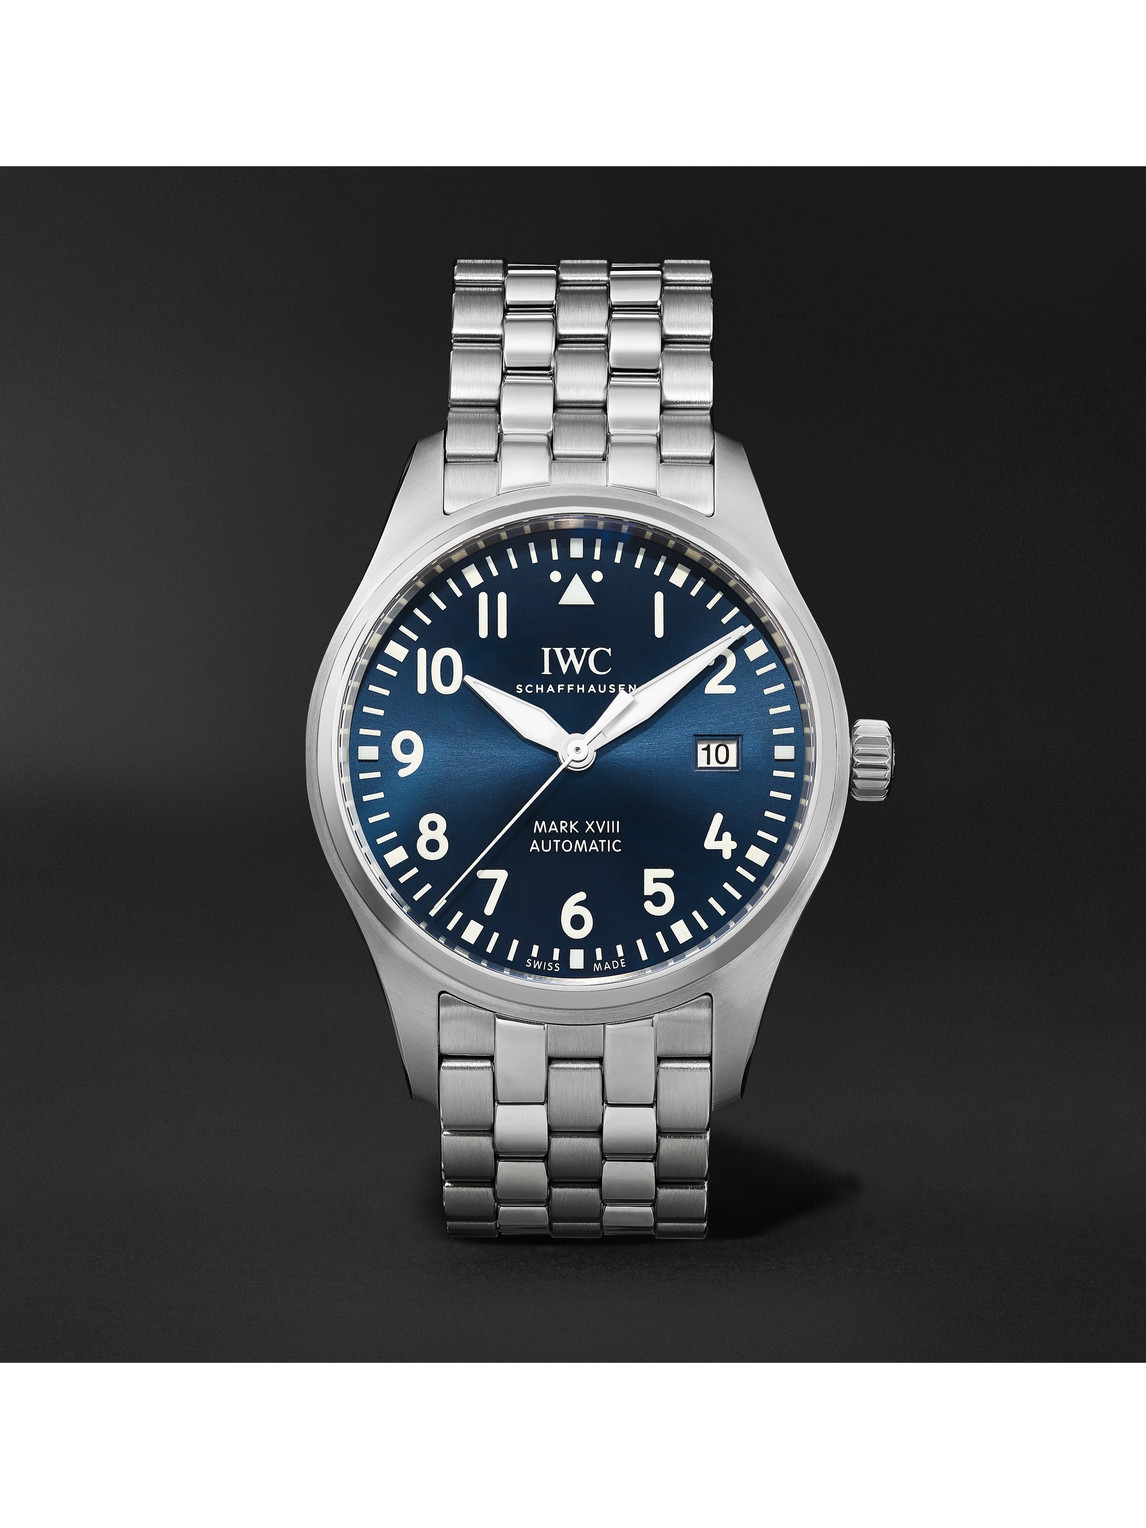 Pilot's Mark XVIII Le Petit Prince Edition Automatic 40mm Stainless Steel Watch, Ref. No. IW327016